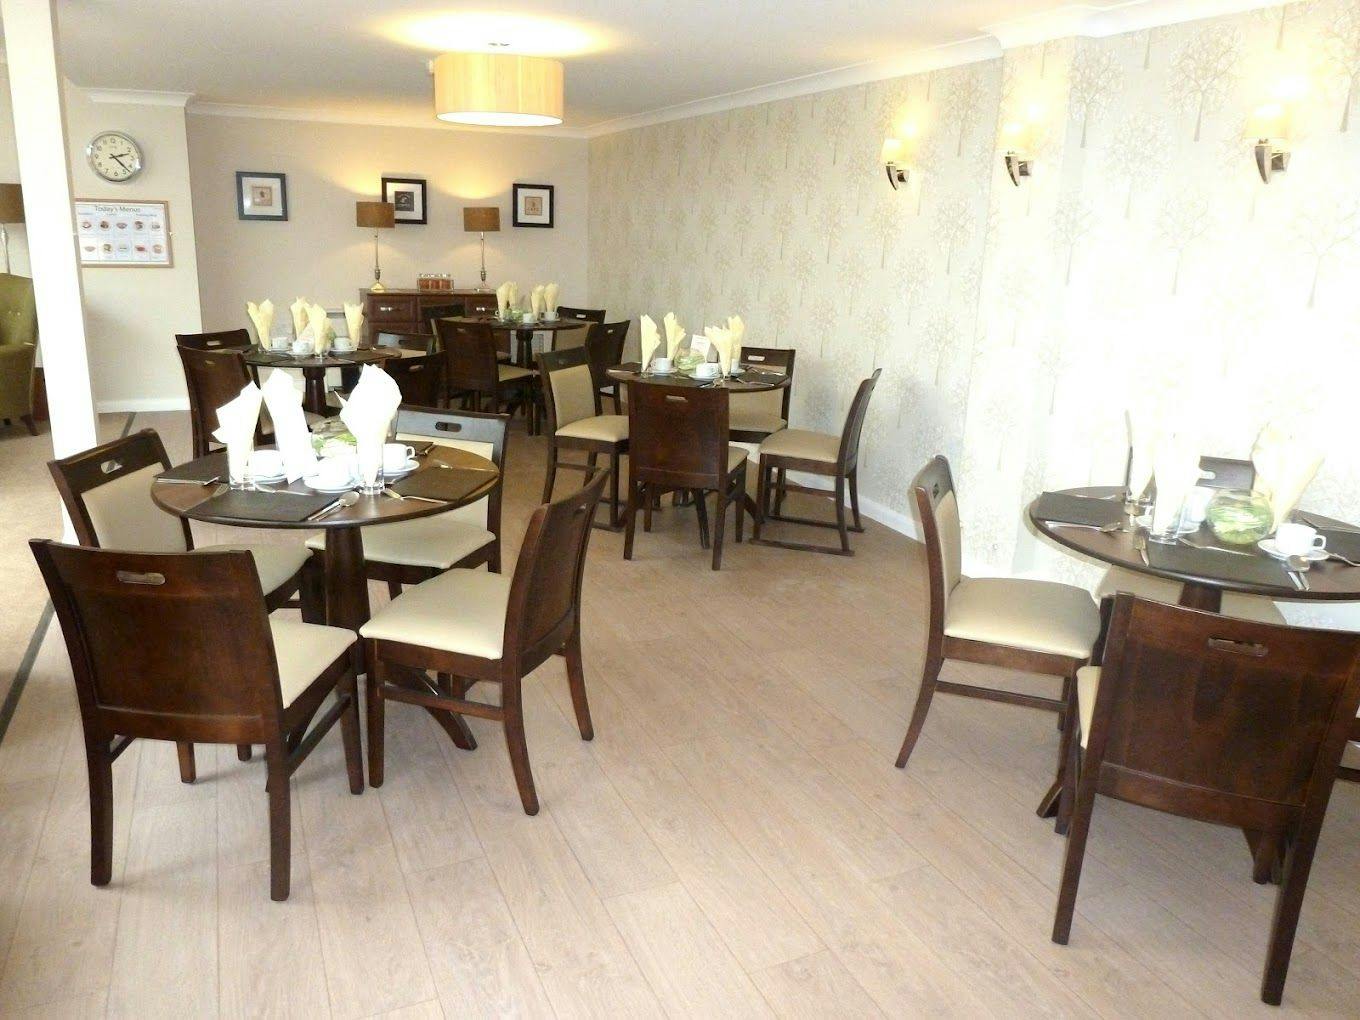 Country Court - Abbey Grange care home 3